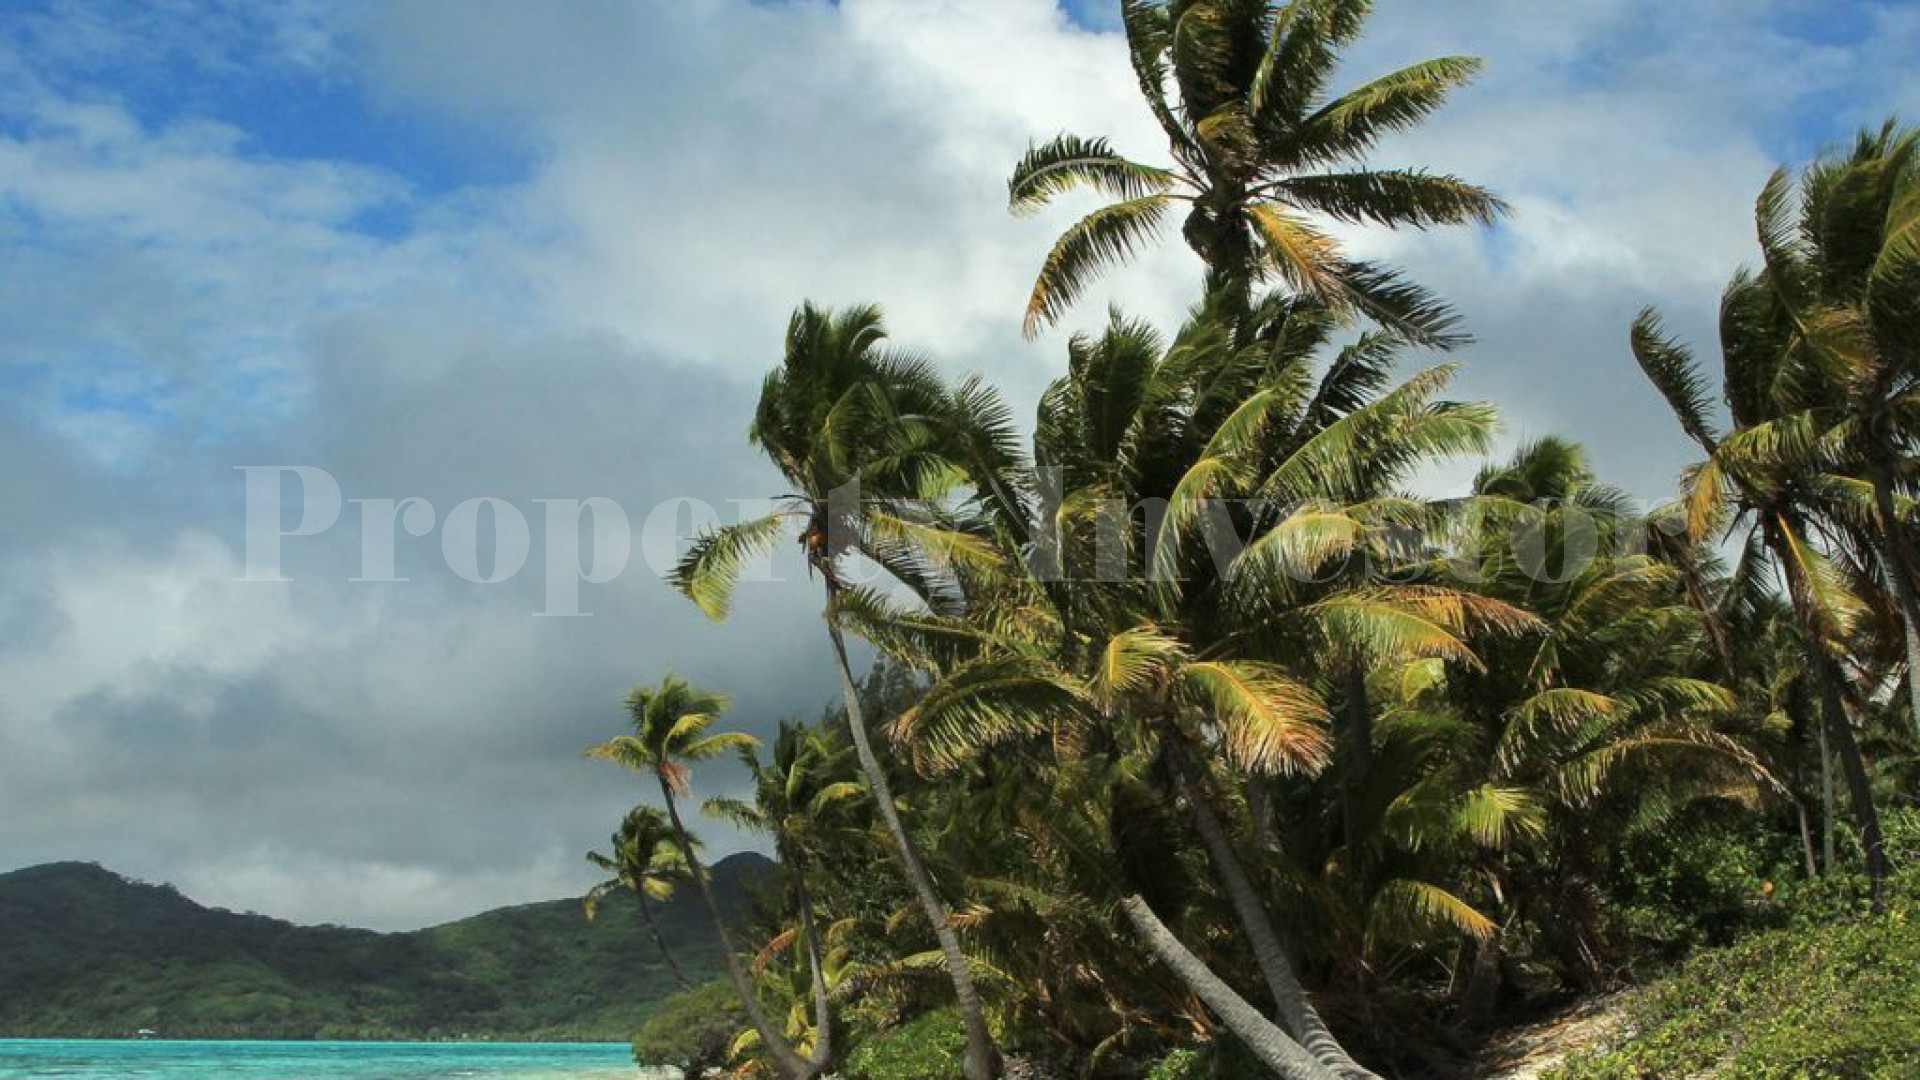 Picturesque 7.12 Hectare Private Virgin Island for Sale in Taha'a, French Polynesia